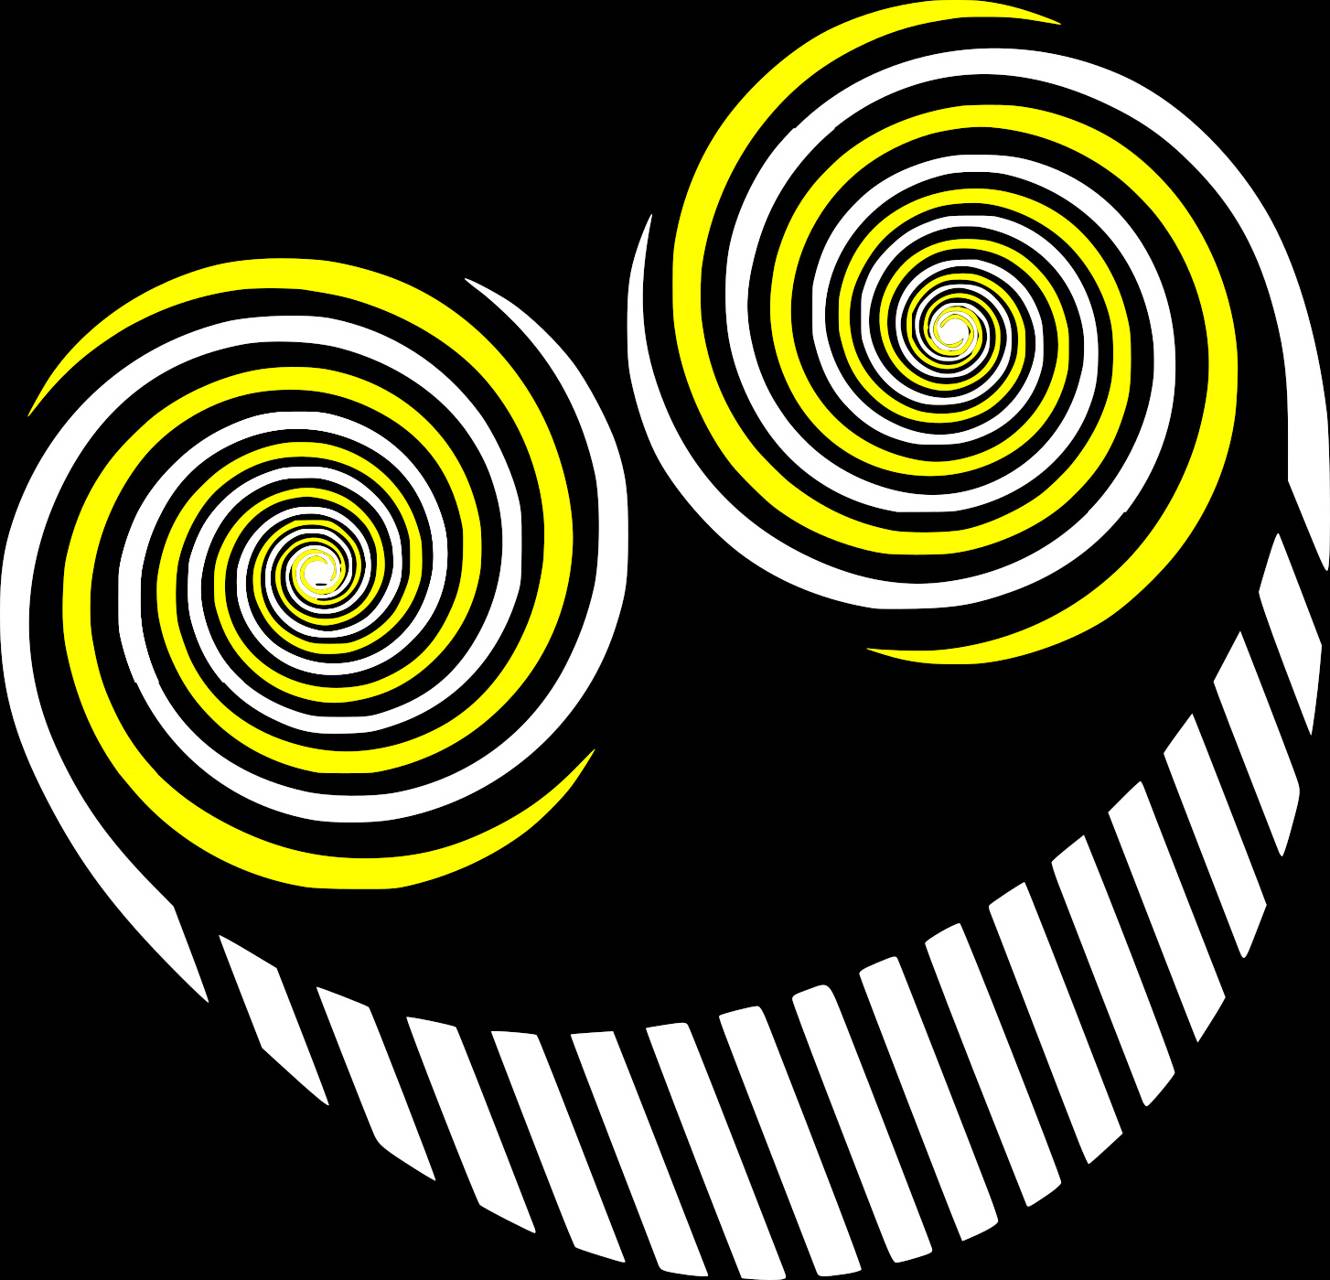 Does anyone have a .png of the smiler eyes on there own? (the swirl) thanks